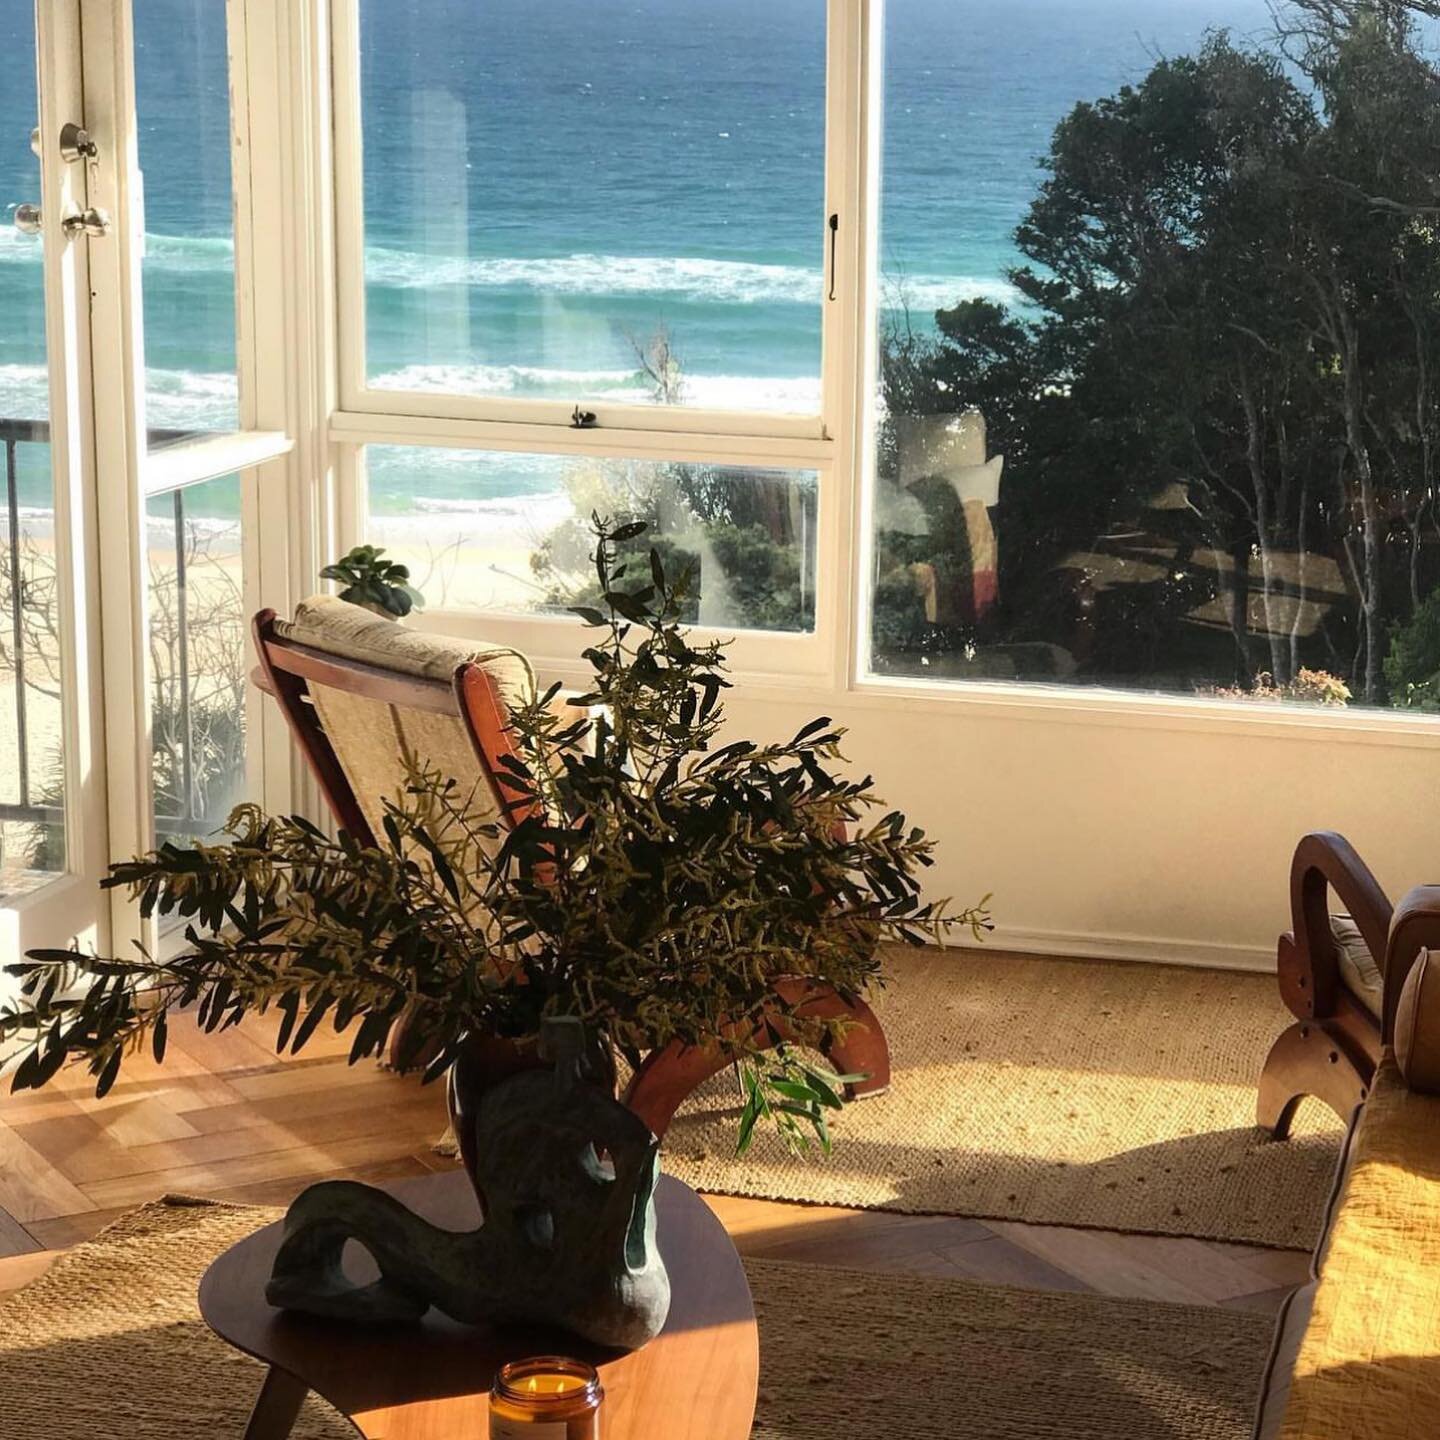 The perfect retro abode, right on the beachfront&hellip; Stay Awhile @thepaintedviewkirra - an ocean lovers renovated retreat filled with bespoke objects and handmade wares, created by local Gold Coast artists.